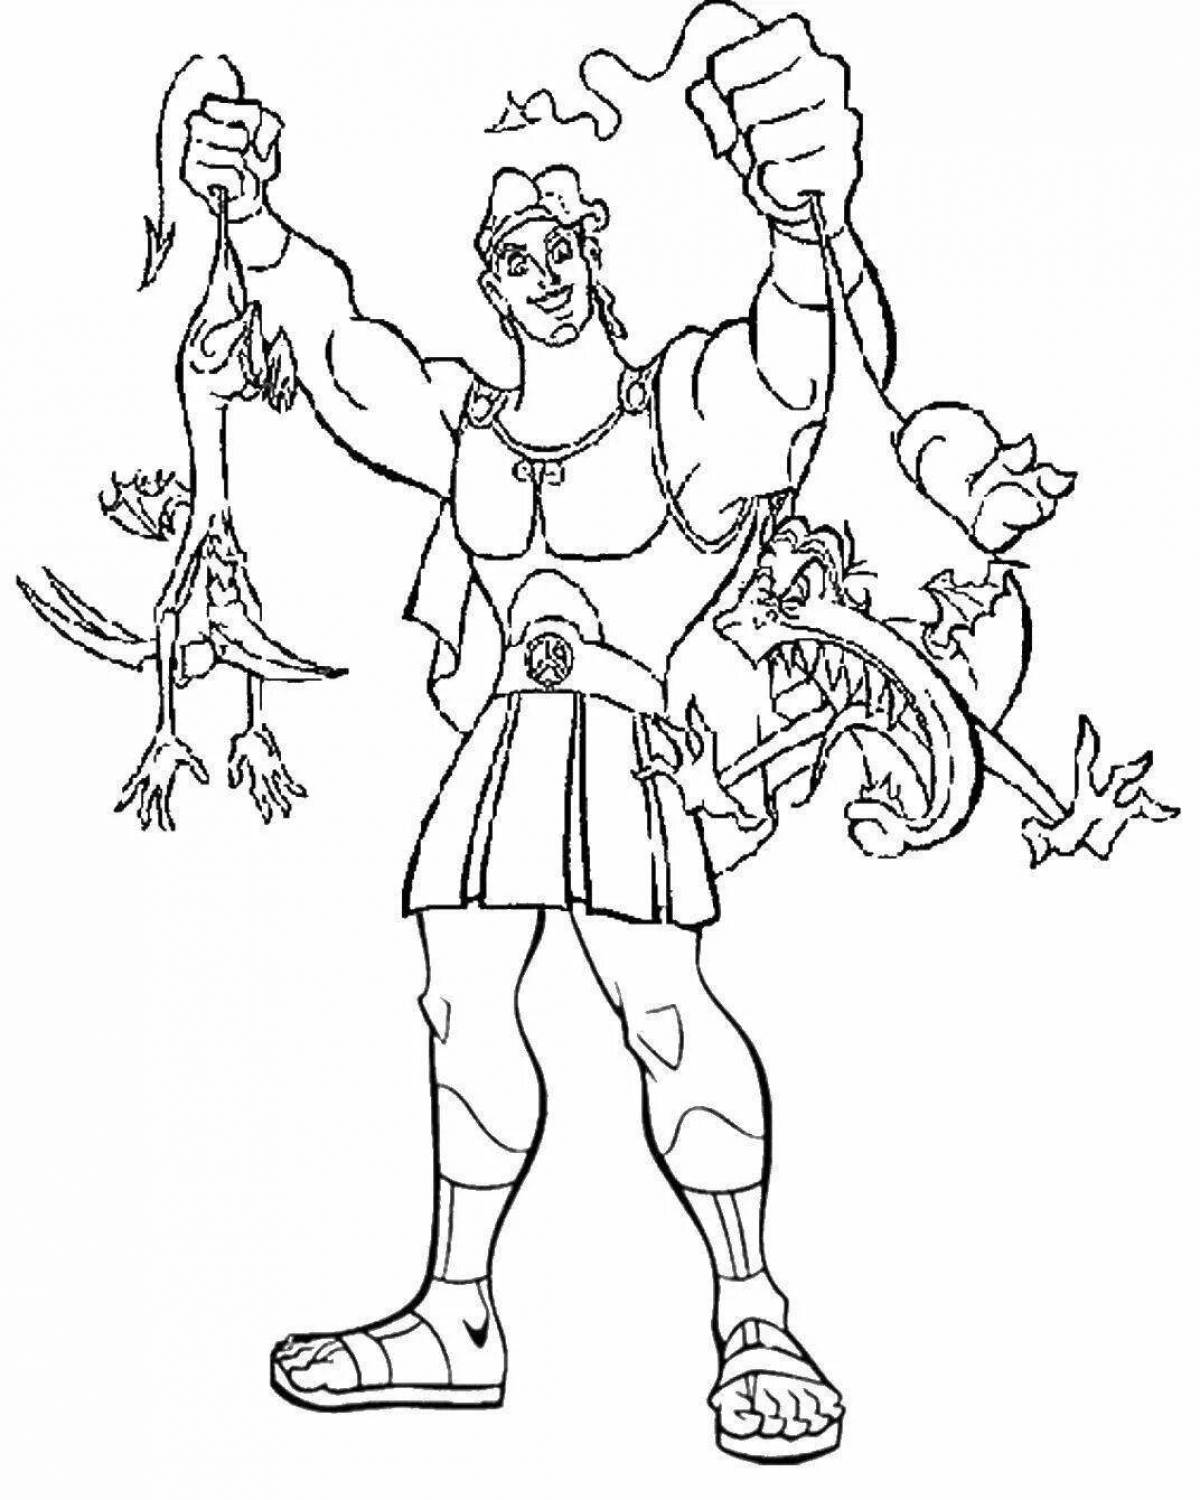 Glorious hercules coloring page